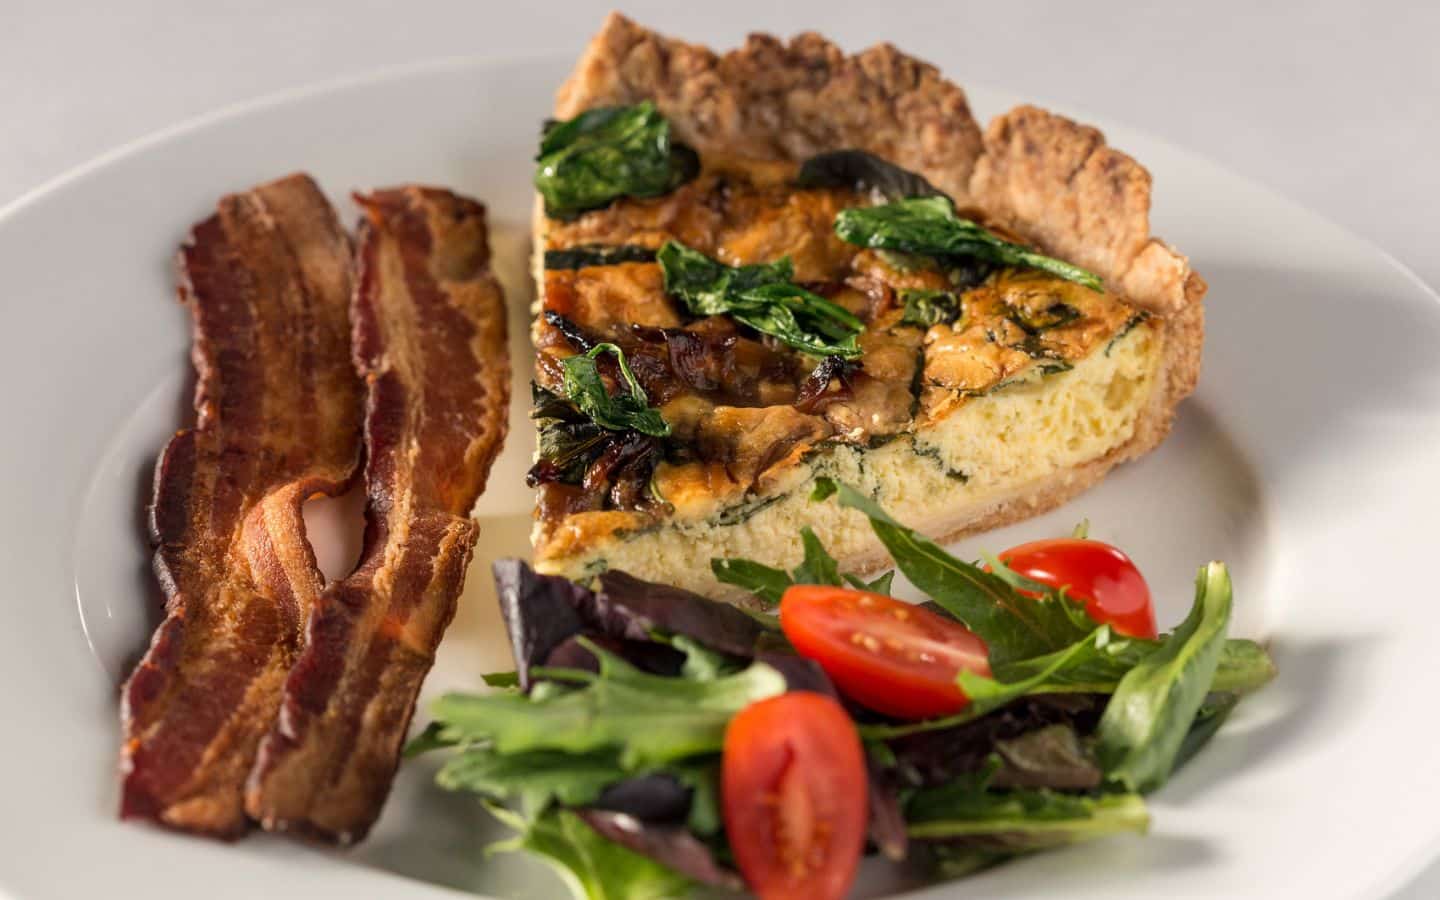 Breakfast plate with quiche, salad and bacon.